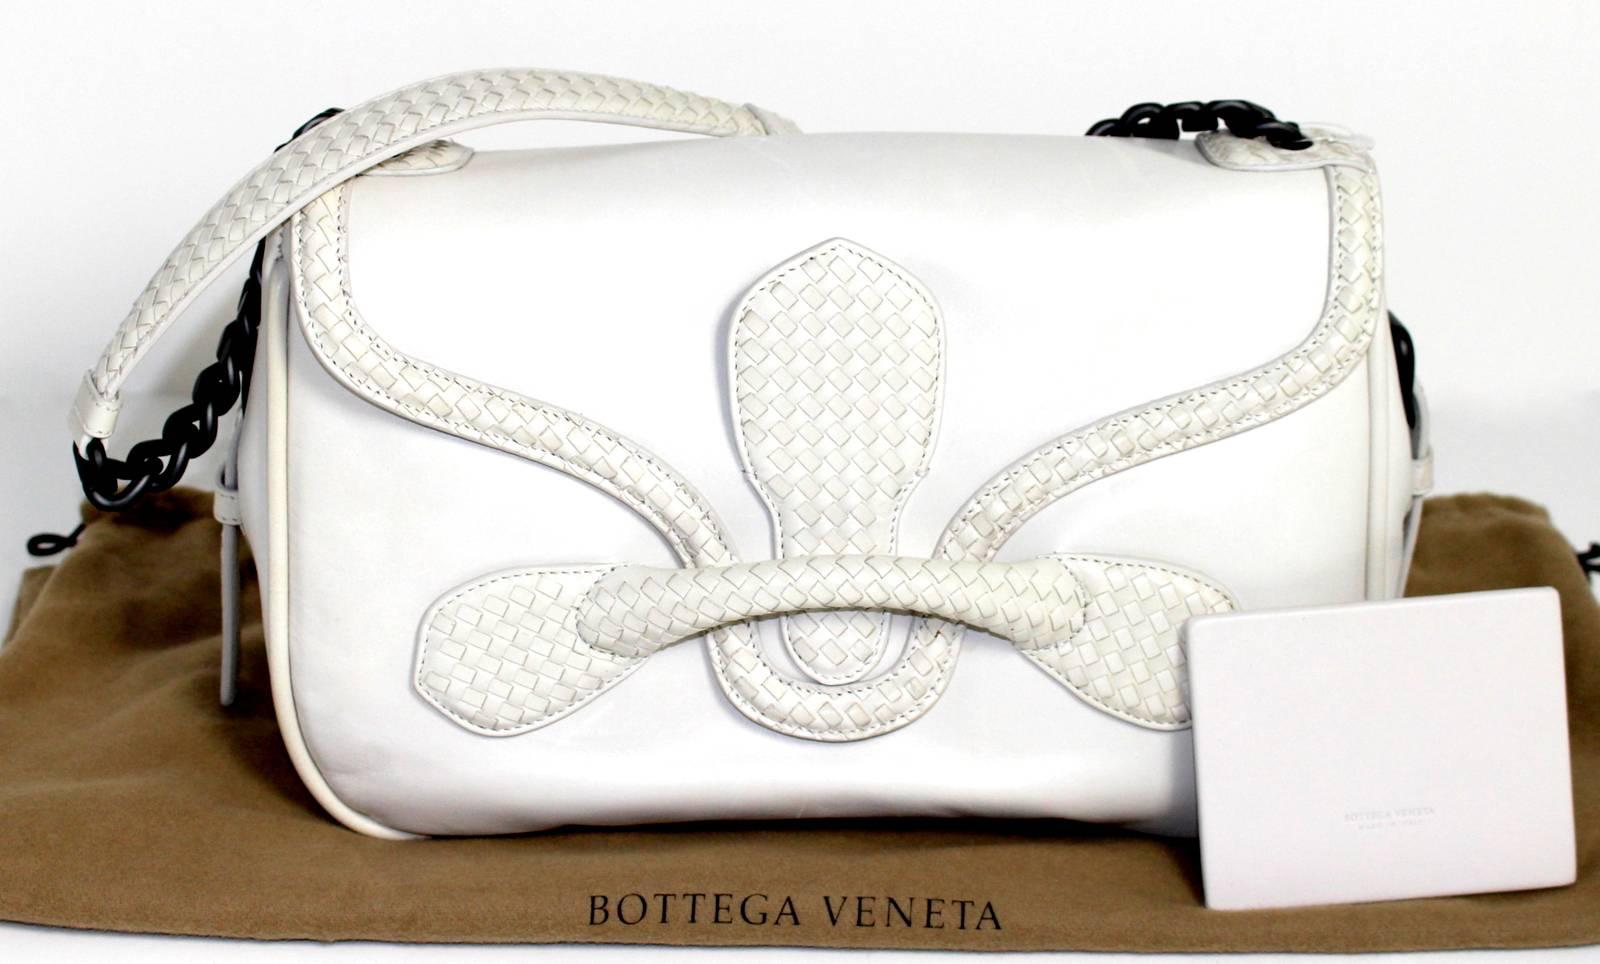 Bottega Veneta Mist New Calf Rialto Shoulder Bag-  Current Retail $2,450.00.  Excellent condition.  Rarely carried; minor signs of handling. 

The medium sized shoulder bag is a current style from BV although this pretty shade of winter white is